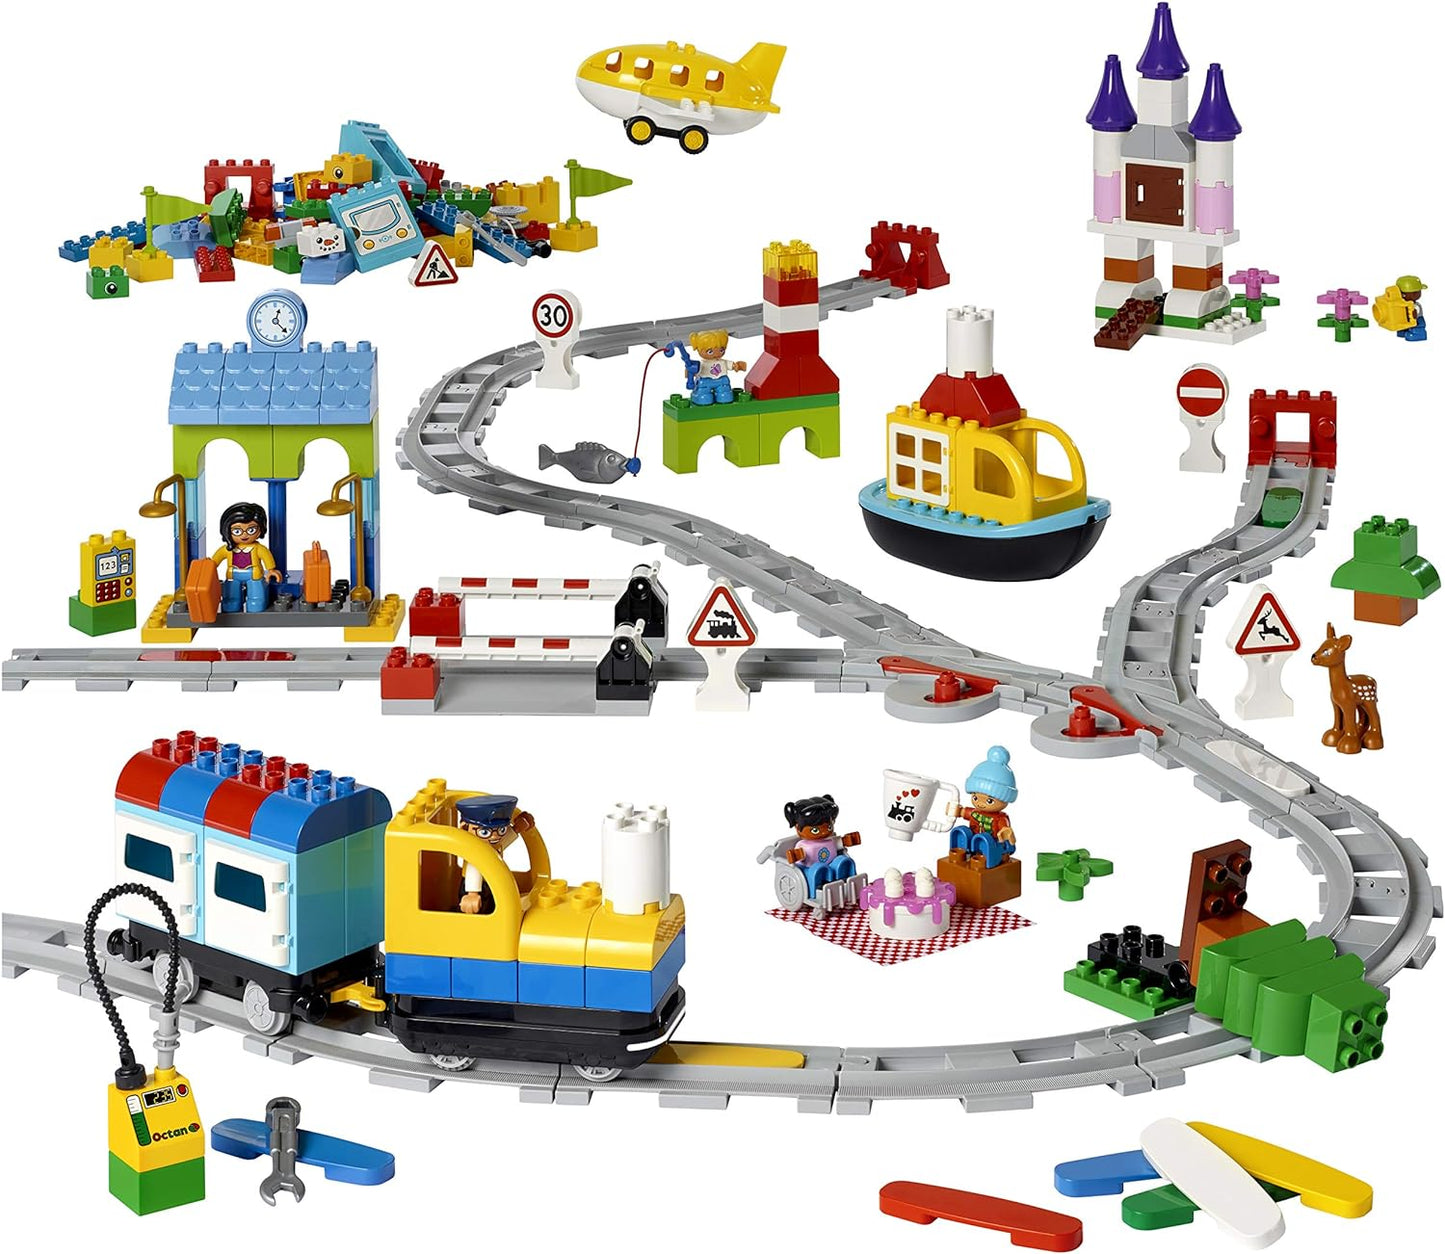 LEGO Education DUPLO Coding Express 45025, Fun STEM Educational Toy, Introduction to Steam Learning for Girls & Boys Ages 2 & Up (234Piece)